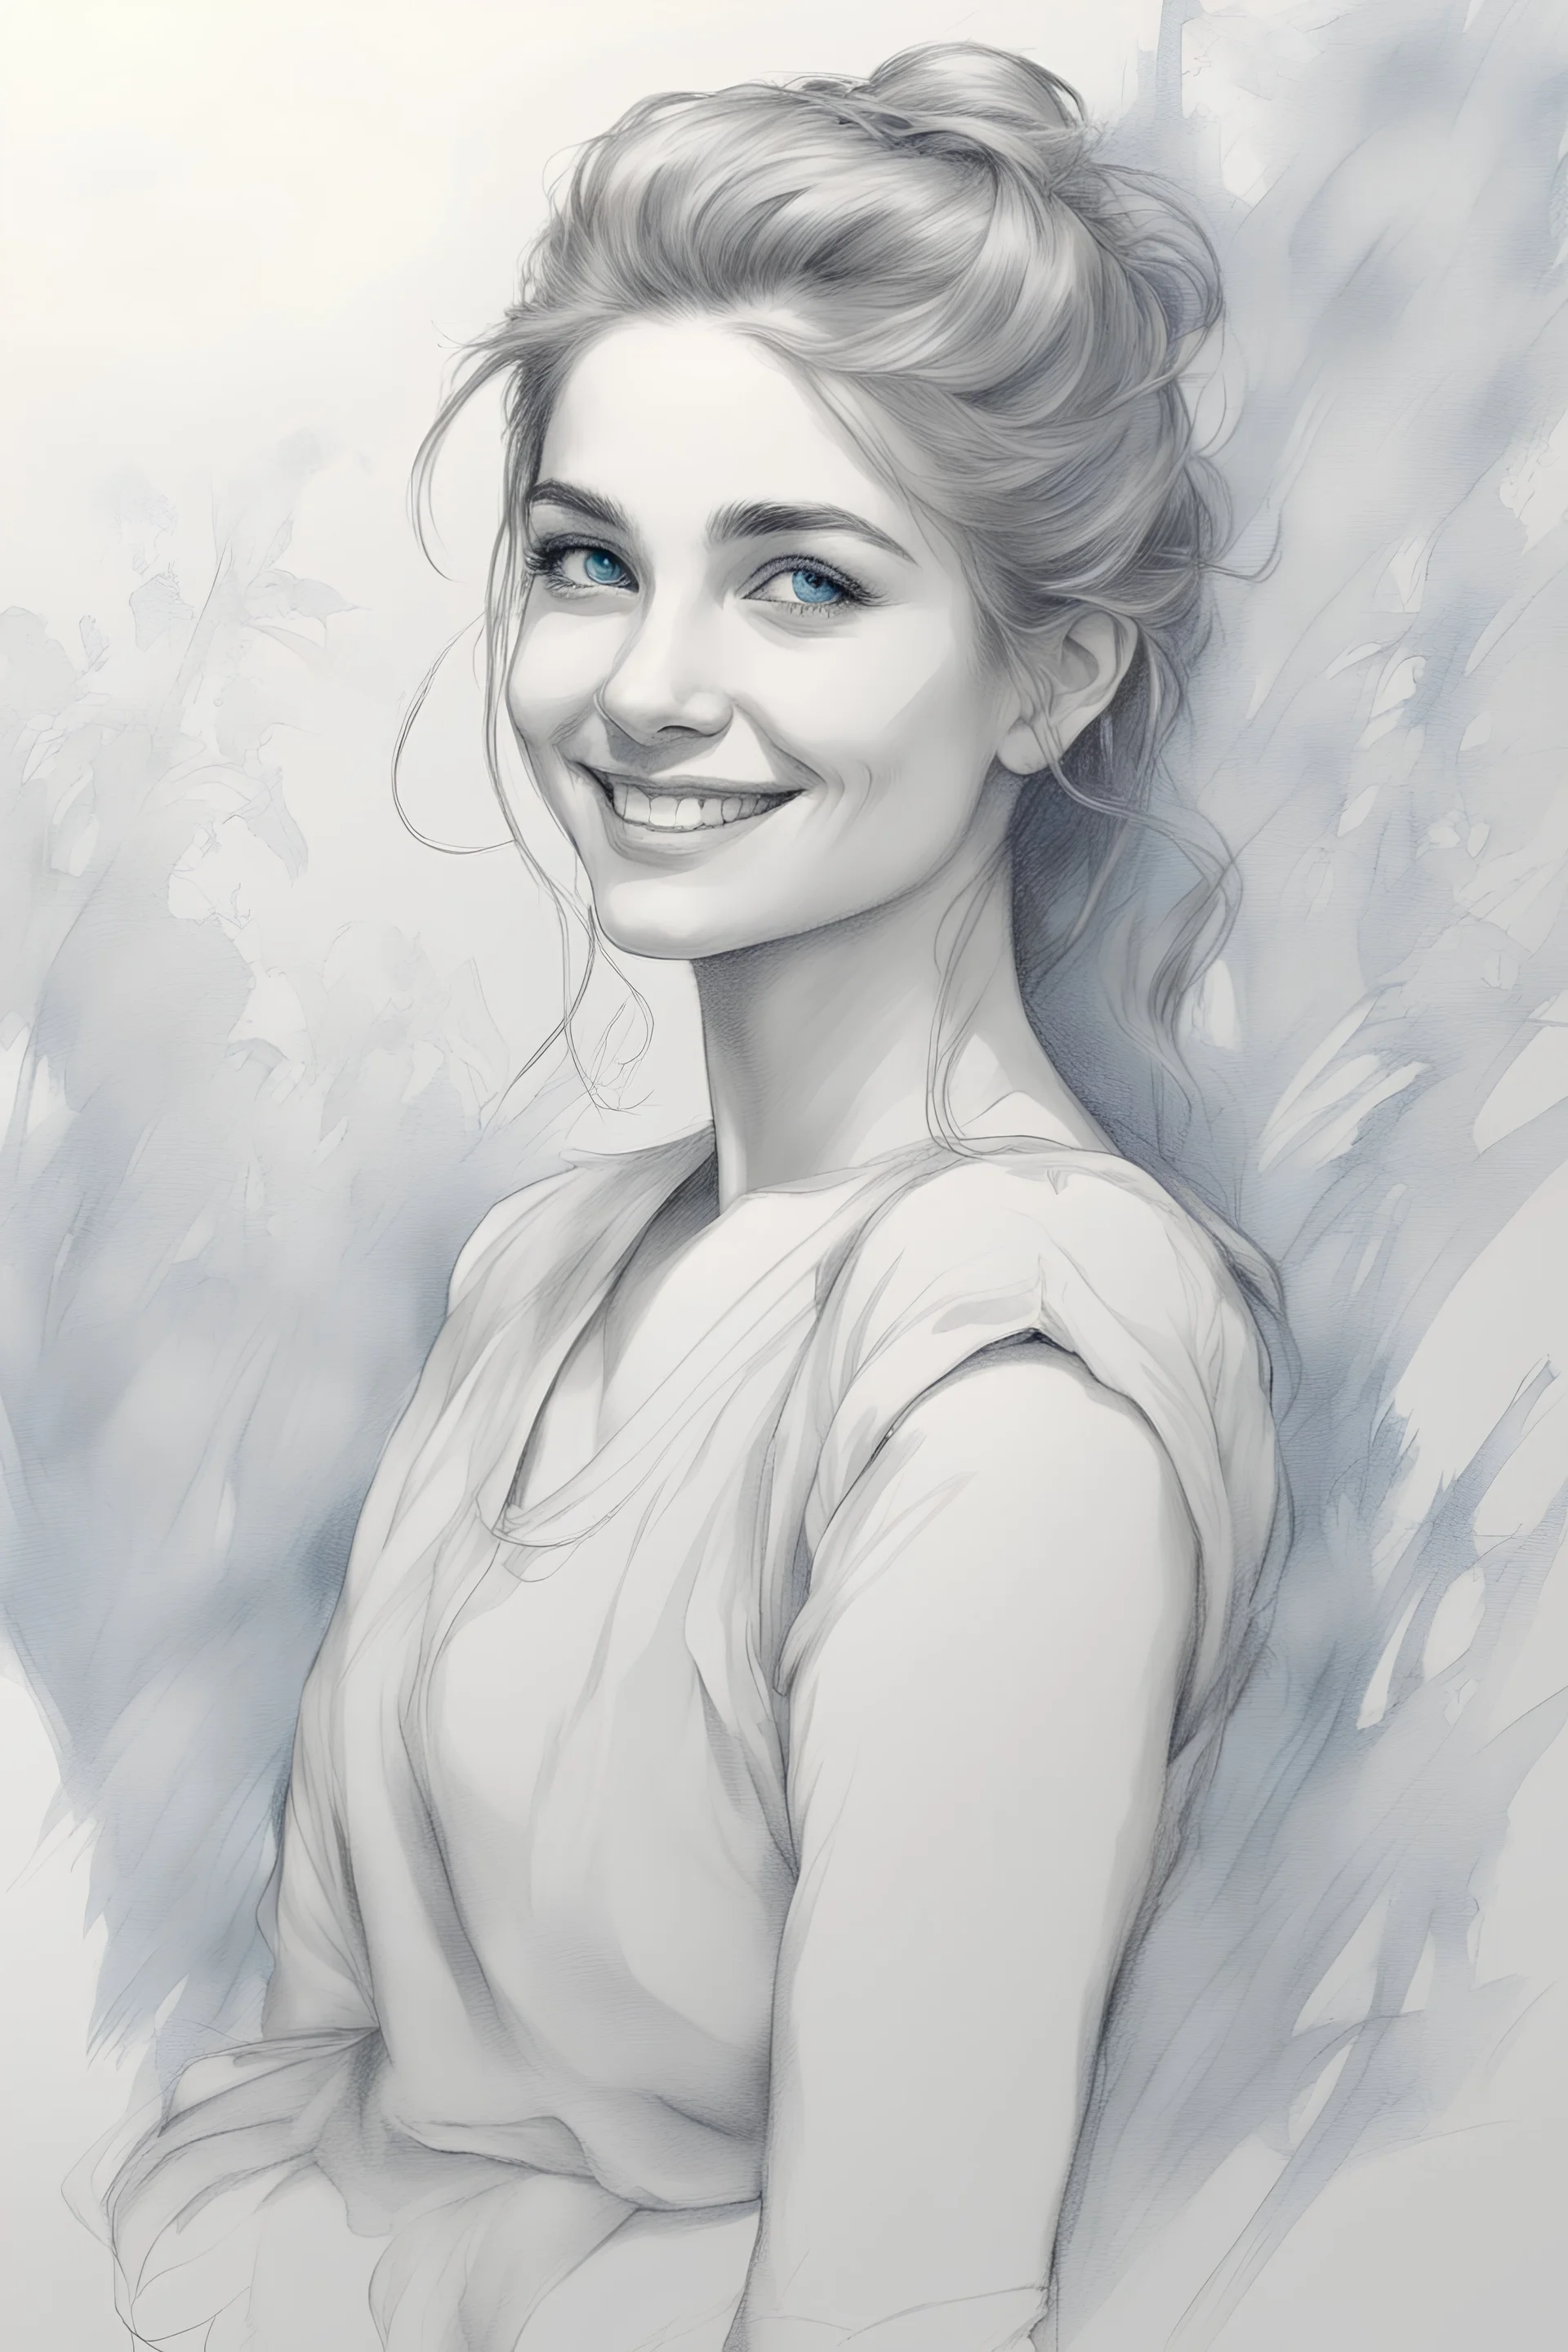 smiling young woman portrait with beautiful thick eye brows, Drawing with a blue ink pen Inspired by the works of Daniel F. Gerhartz, with a fine art aesthetic and a highly detailed, realistic style